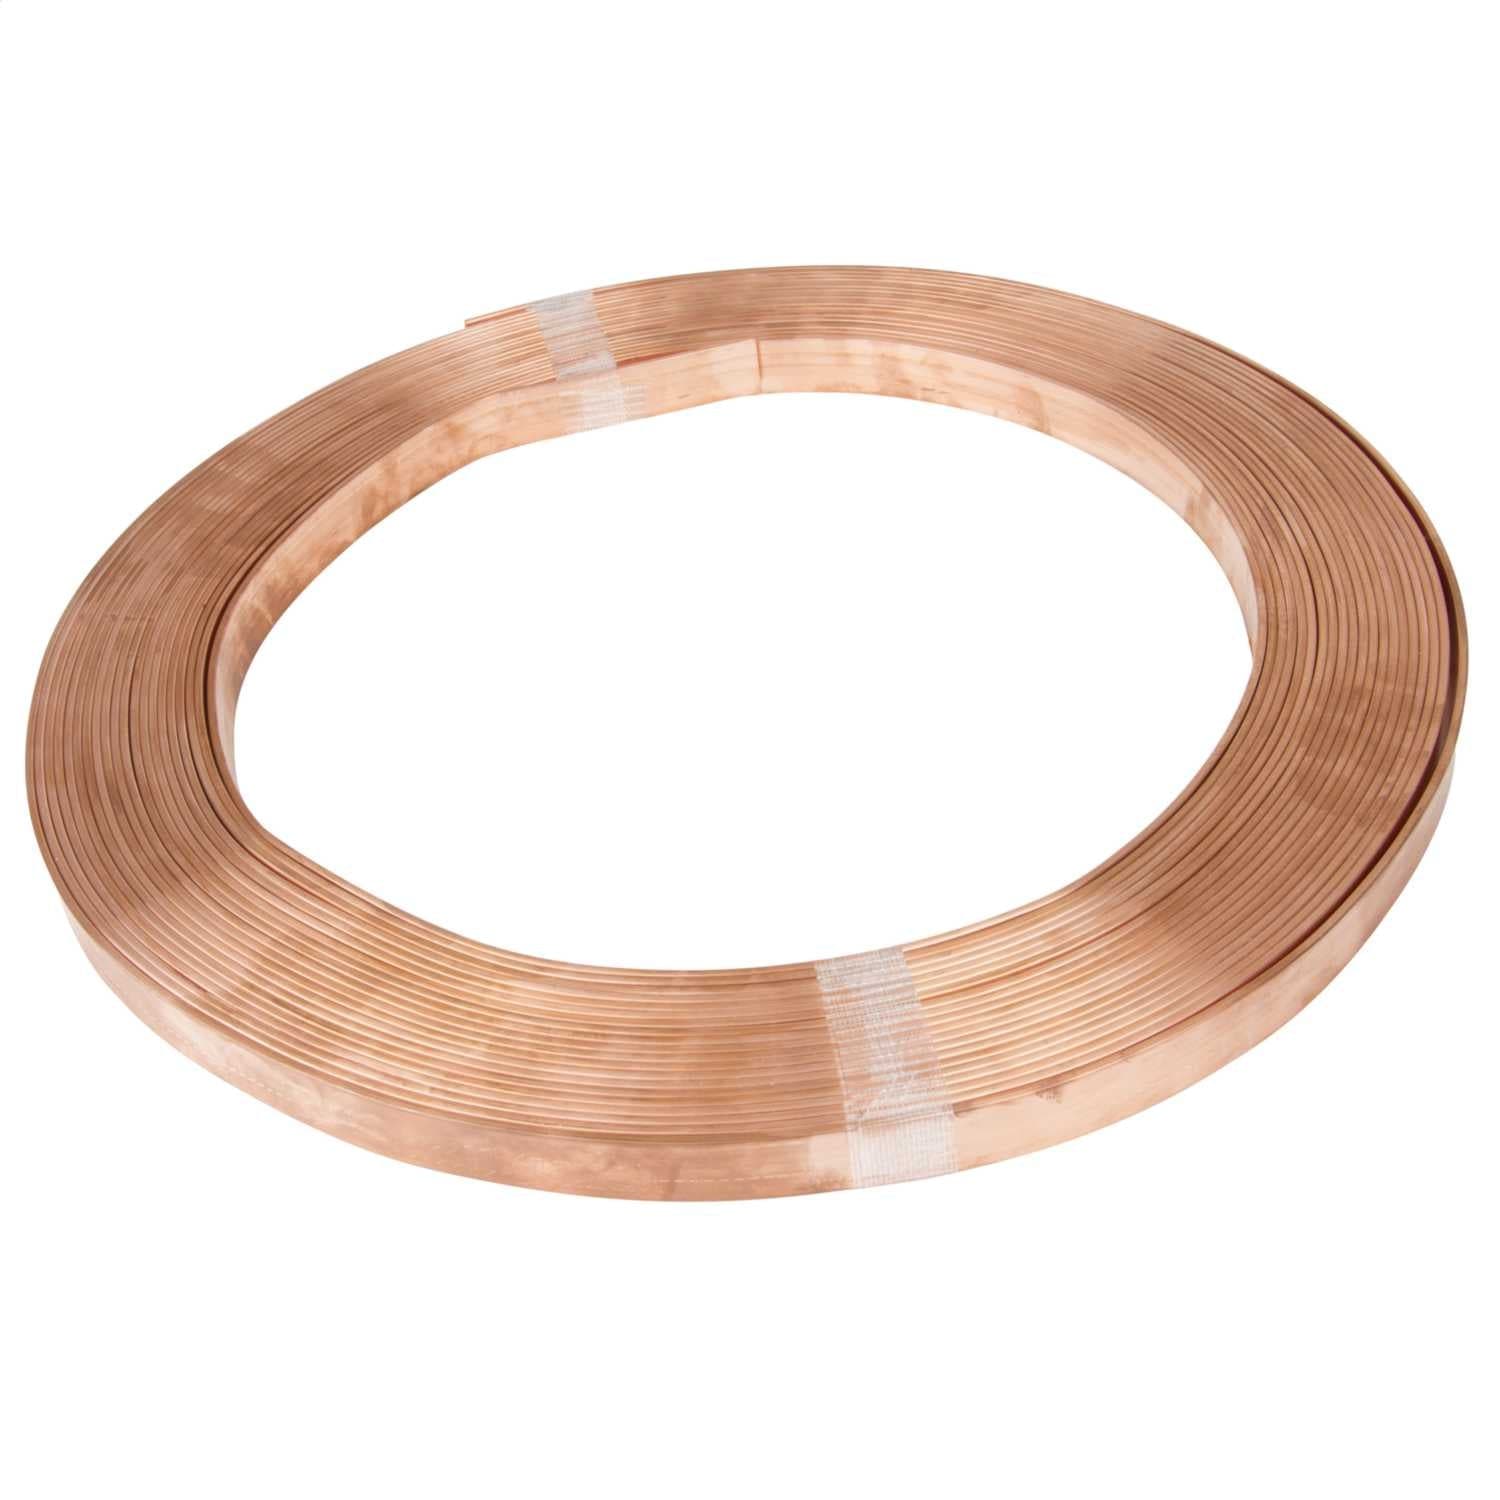 RR Copper Arrestor Tape 25mm x 50m Roll | Grounding Conductor | Supply Master Ghana Power Management & Protection Buy Tools hardware Building materials